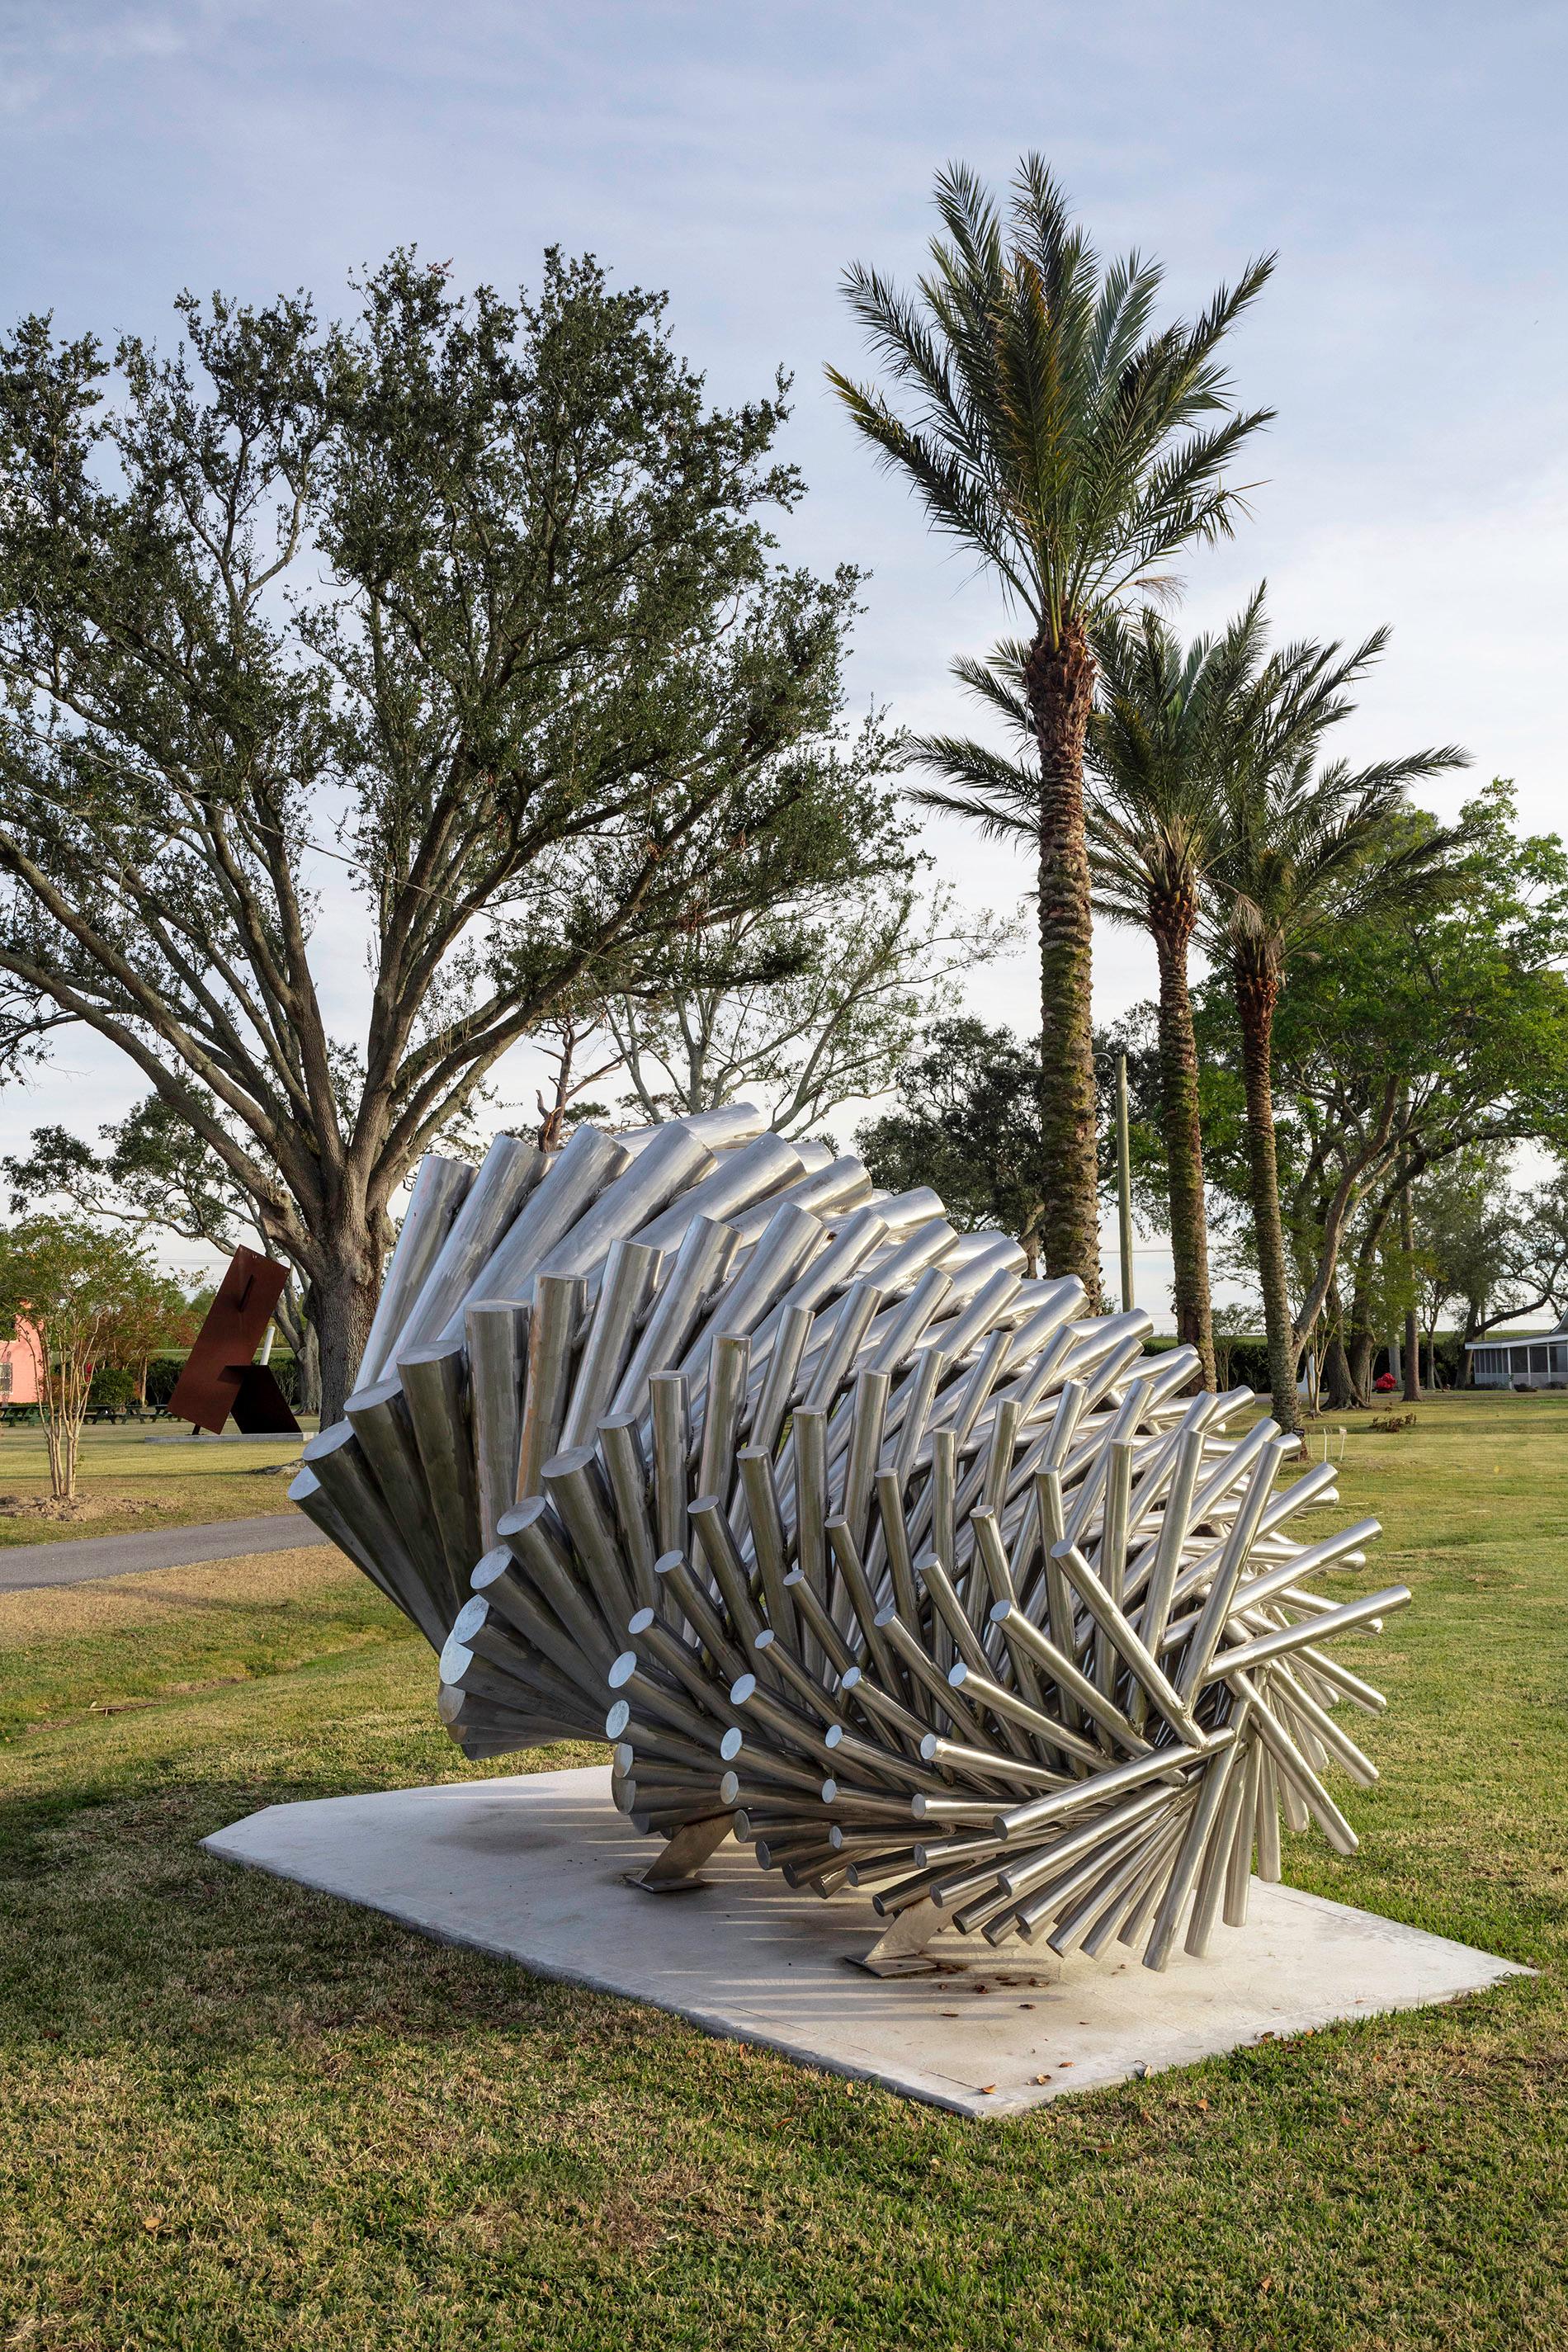 Nest - large, complex, geometric, abstract, stainless steel, outdoor sculpture - Gray Abstract Sculpture by Jason Kimes